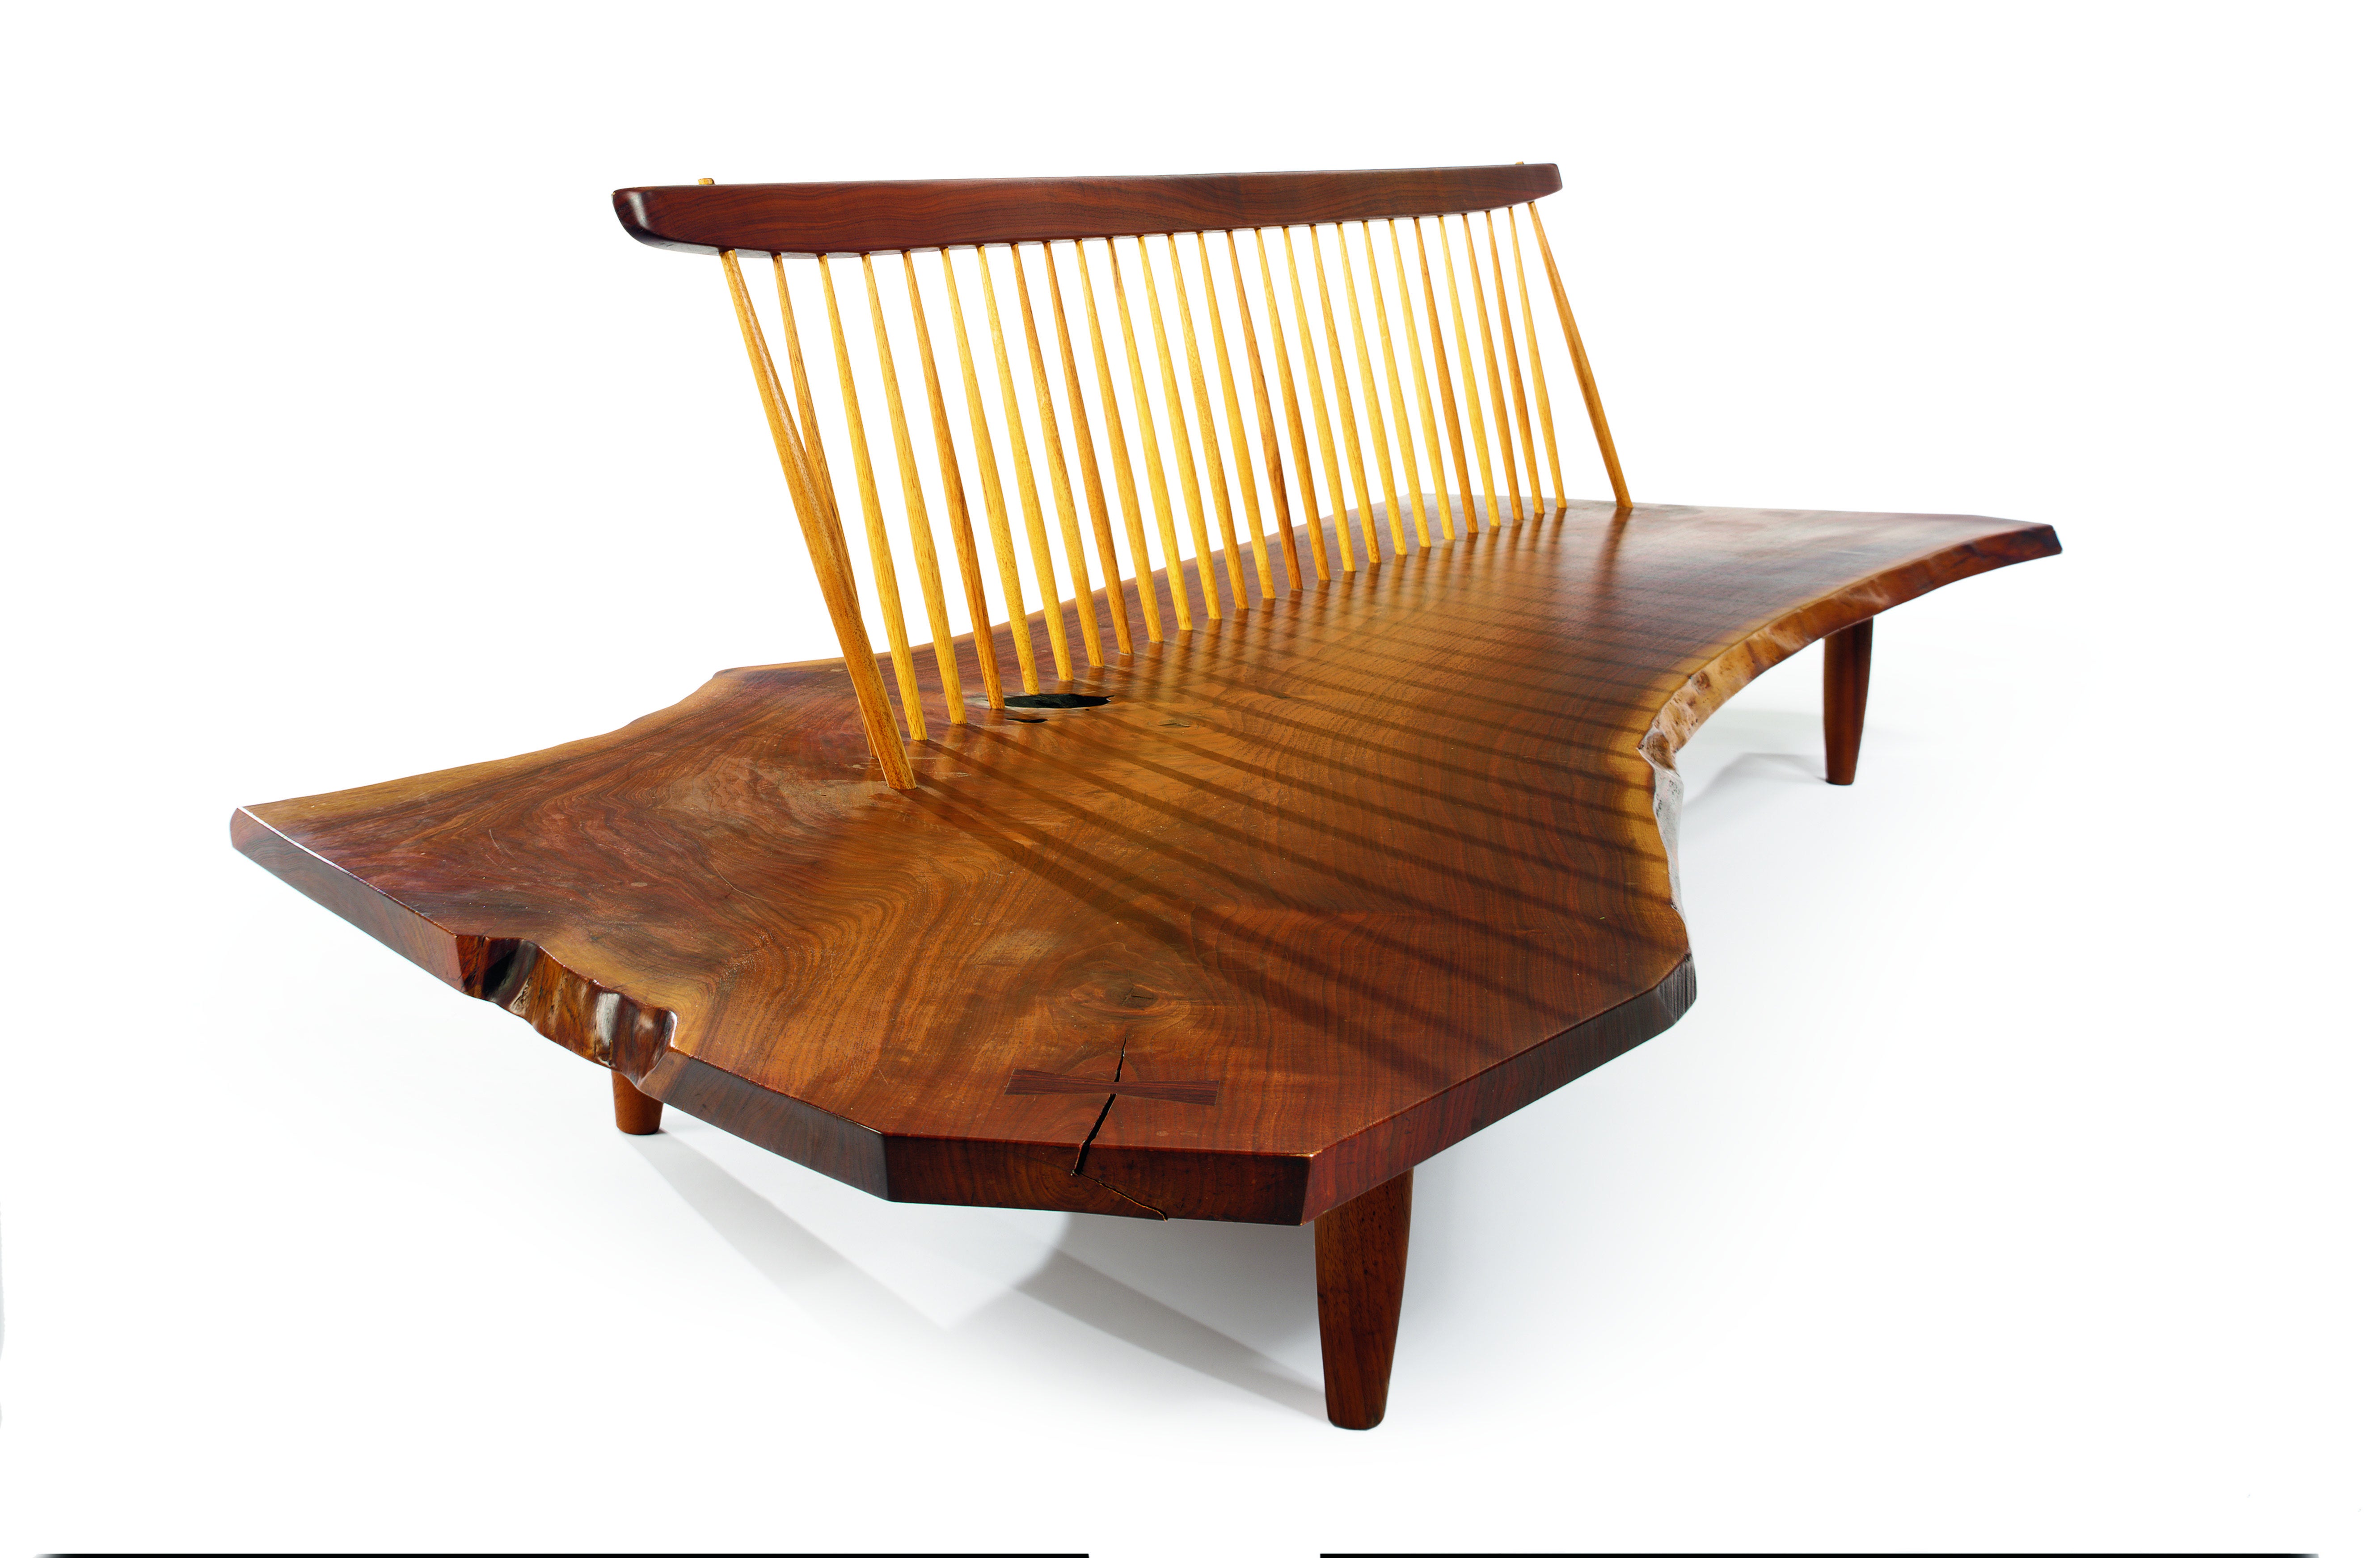 Conoid Bench from the Rockefeller guesthouse by George Nakashima